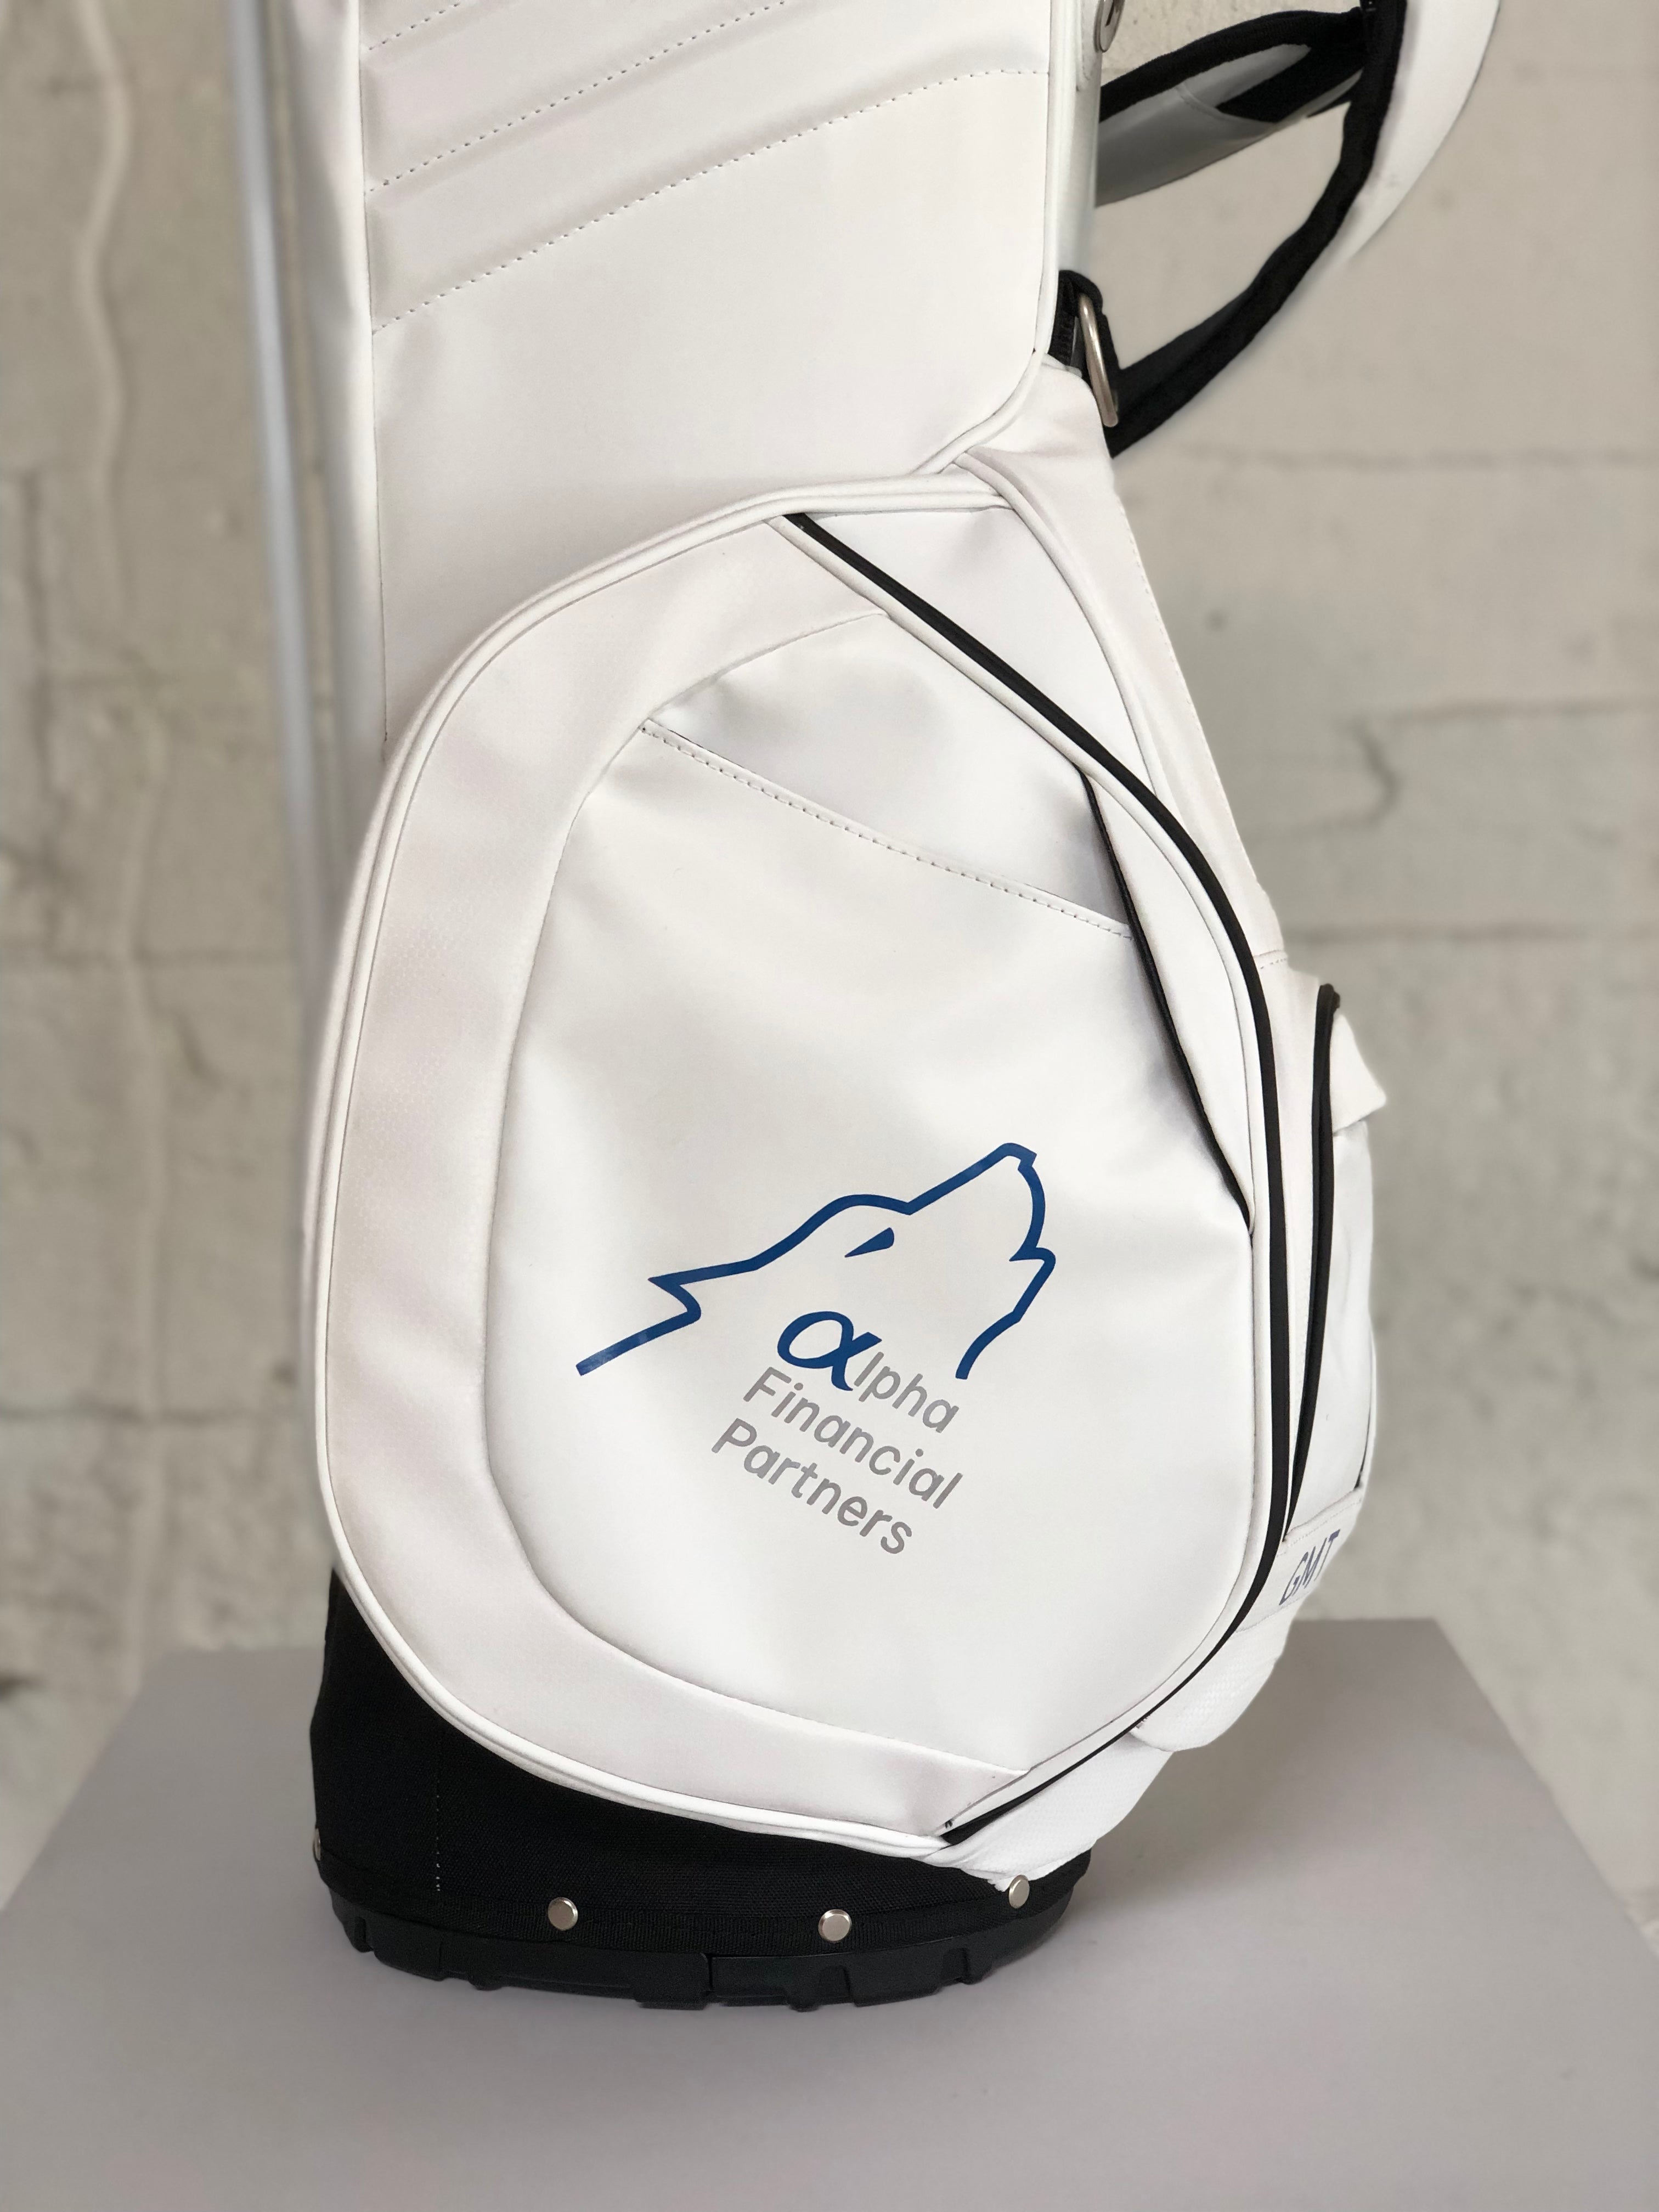 MNML GOLF white bag with financial company logo painted on thermal cooler pocket.